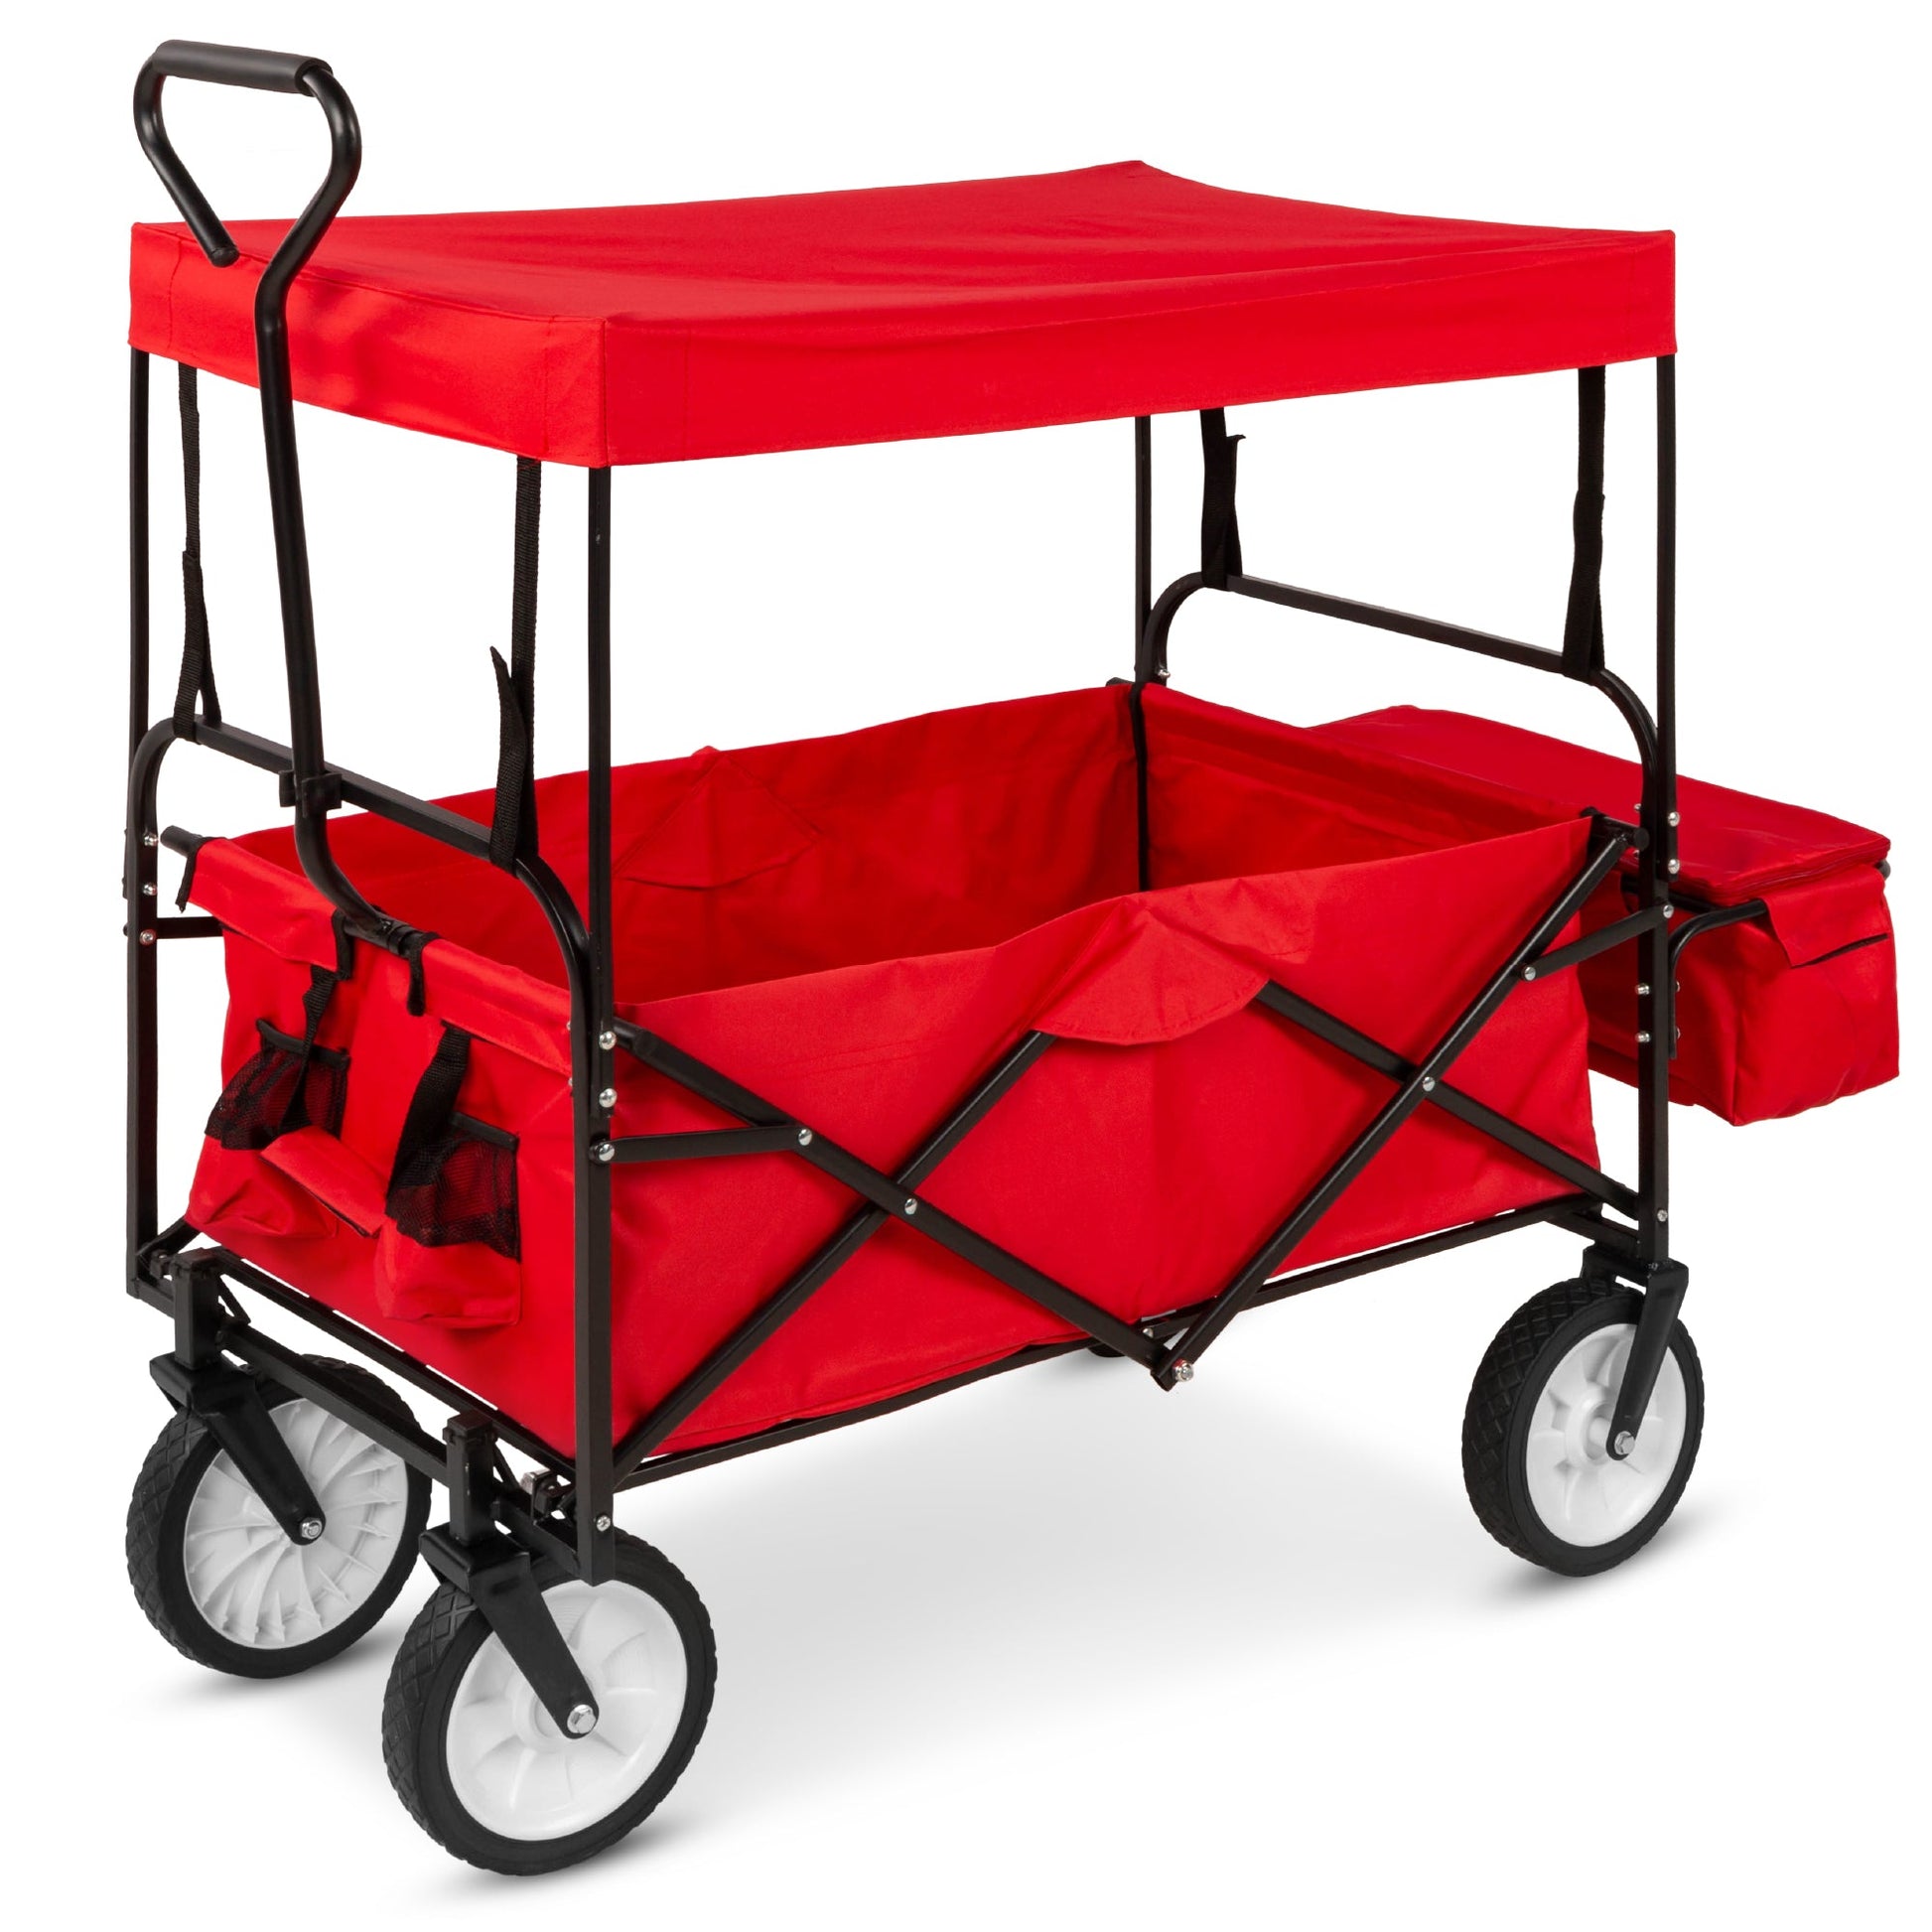 Utility Wagon Cart w/ Folding Design, 2 Cup Holders, Removable Canopy